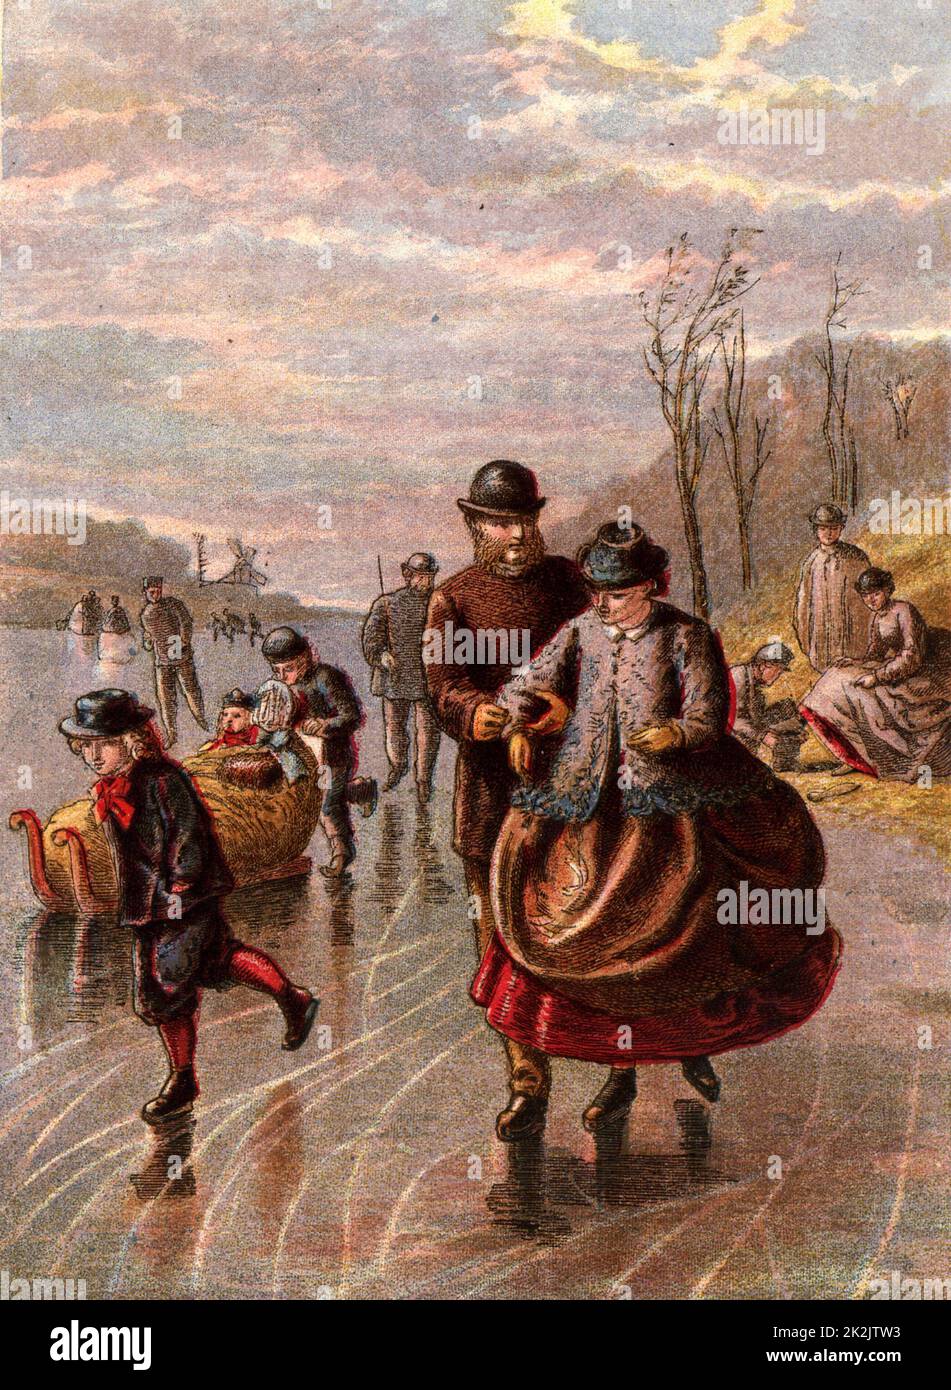 Ice skating on a frozen river. Kronheim chromolithograph from 'Pictures from Nature' by Mary Howitt (London, 1869). Stock Photo